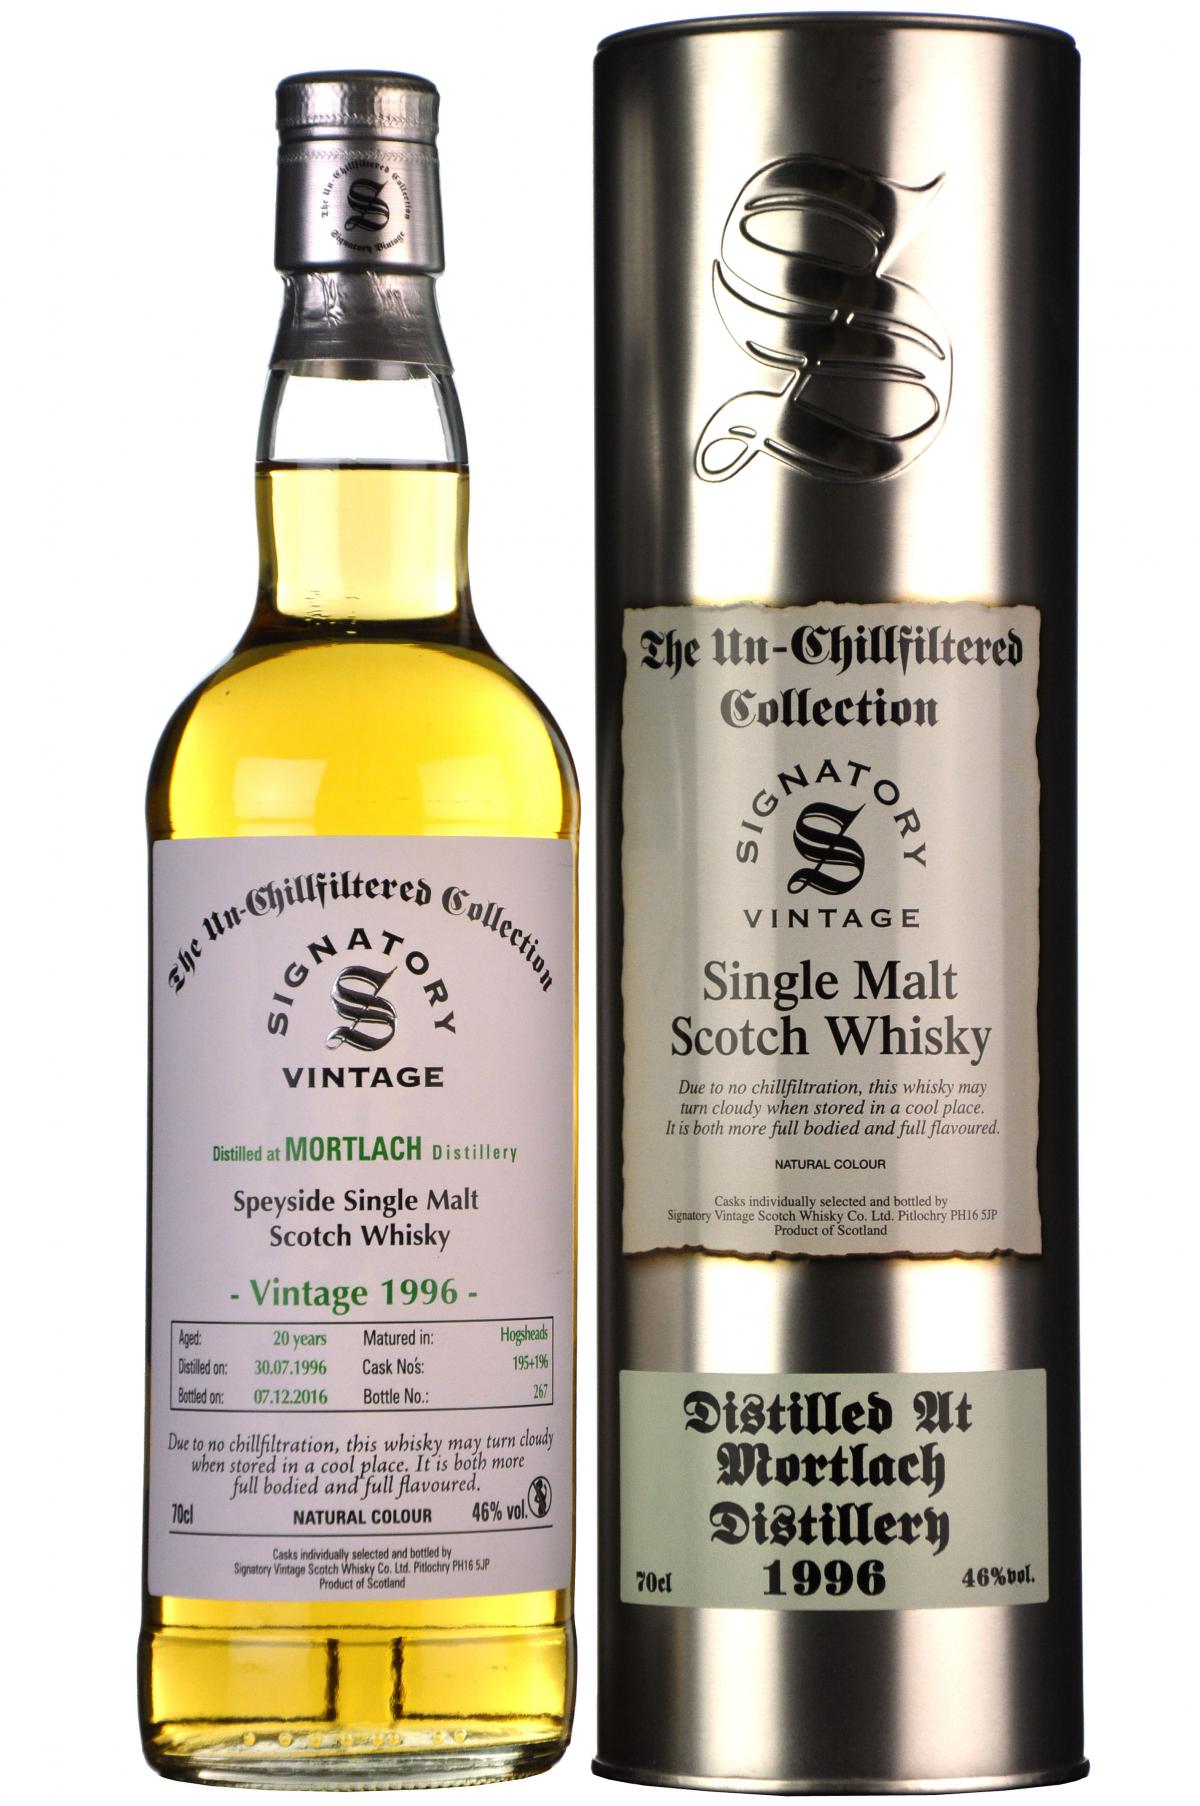 mortlach 1996, 20 year old, signatory vintage cask 195 + 196